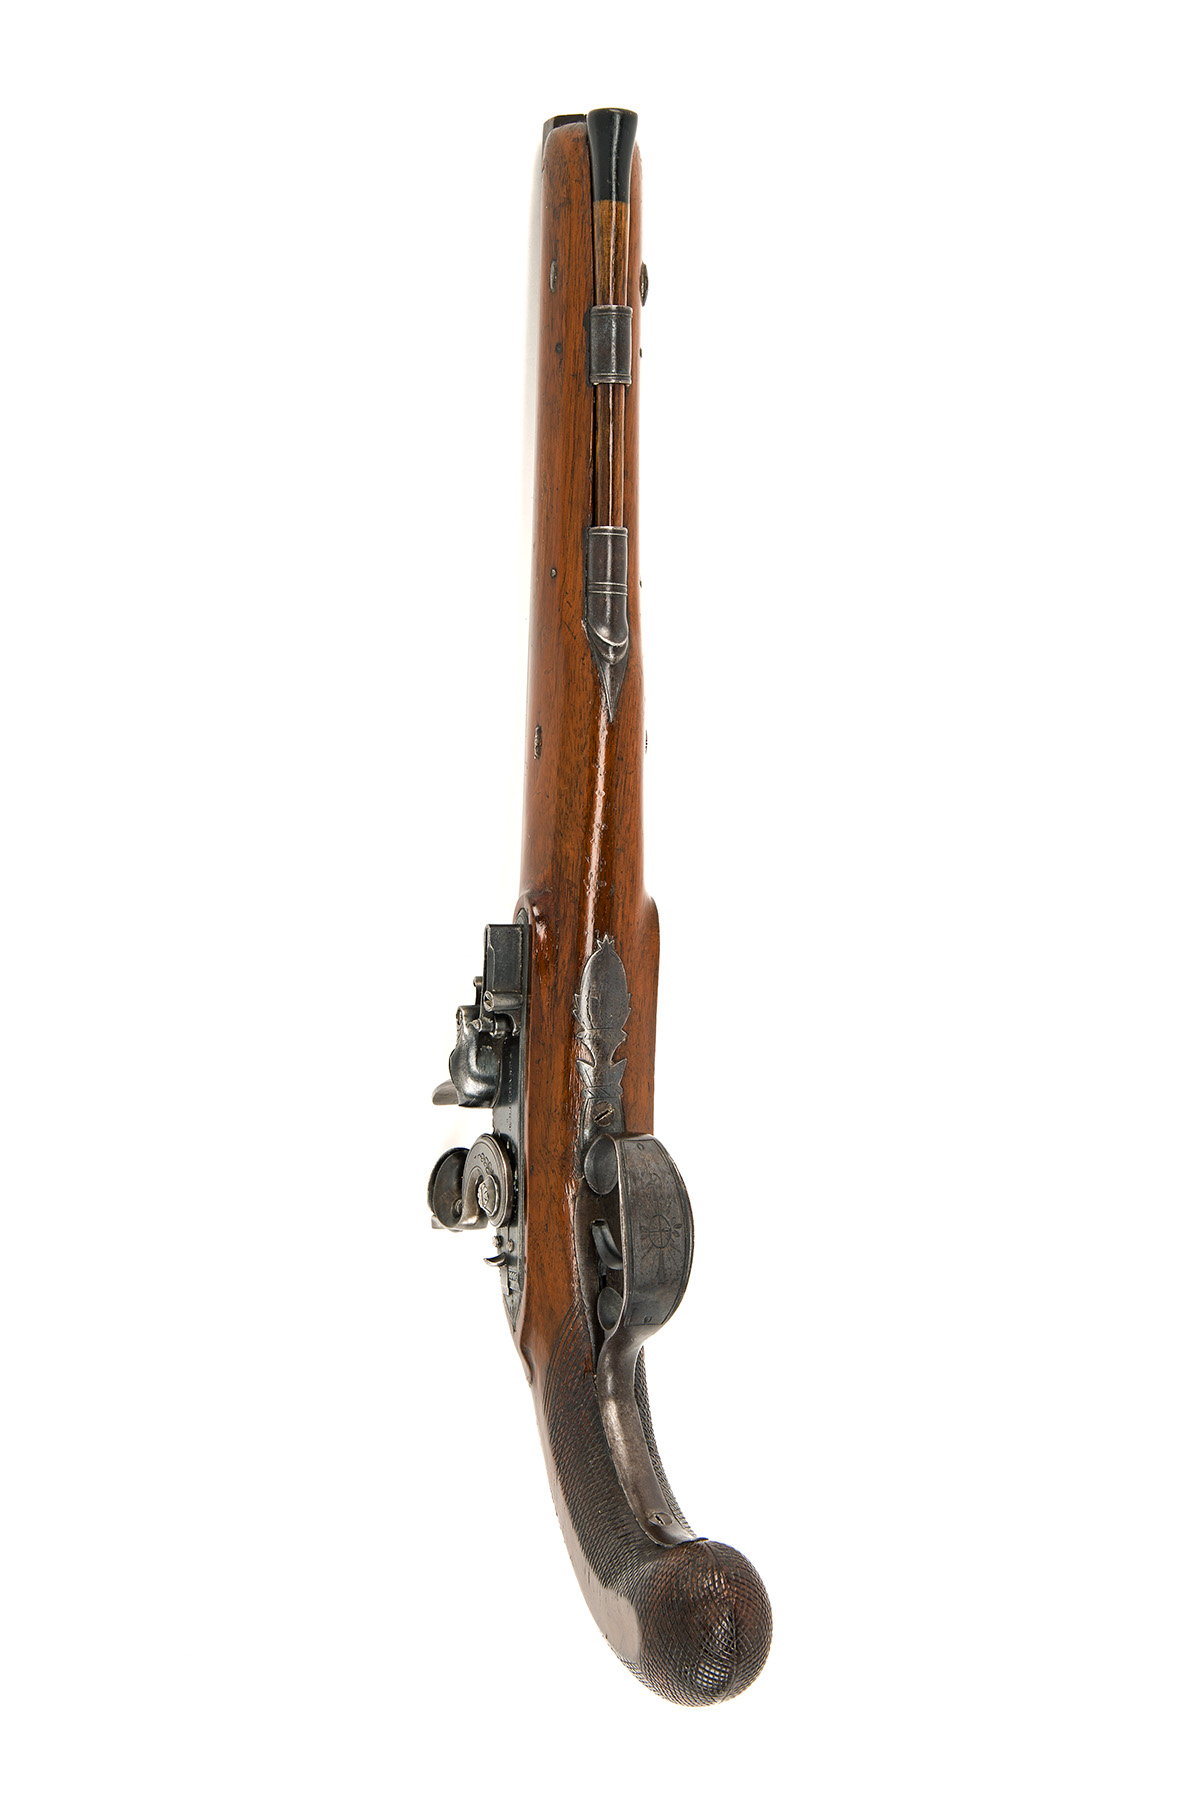 A 24-BORE FLINTLOCK DUELLING PISTOL SIGNED JN. RICHARDS, LONDON, no visible serial number, circa - Image 4 of 4